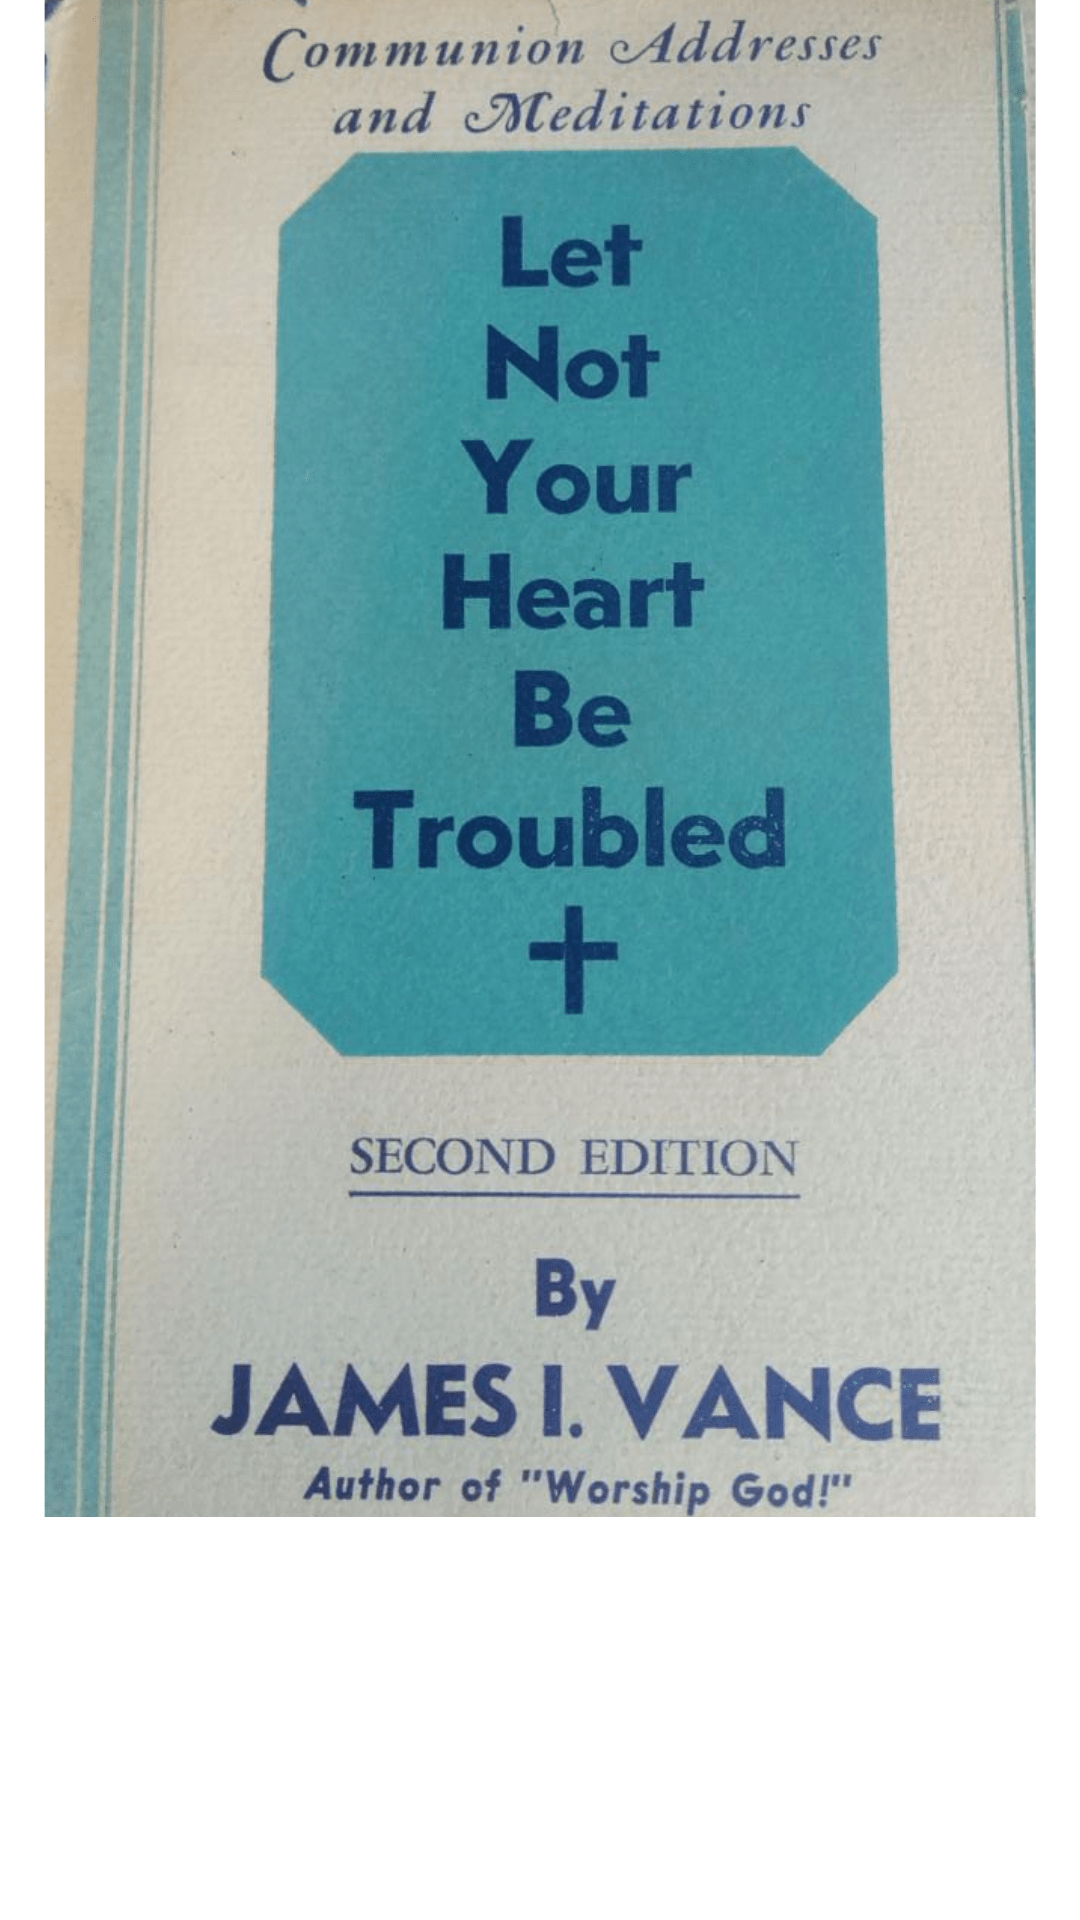 Let Not Your Heart Be Troubled by James I. Vance